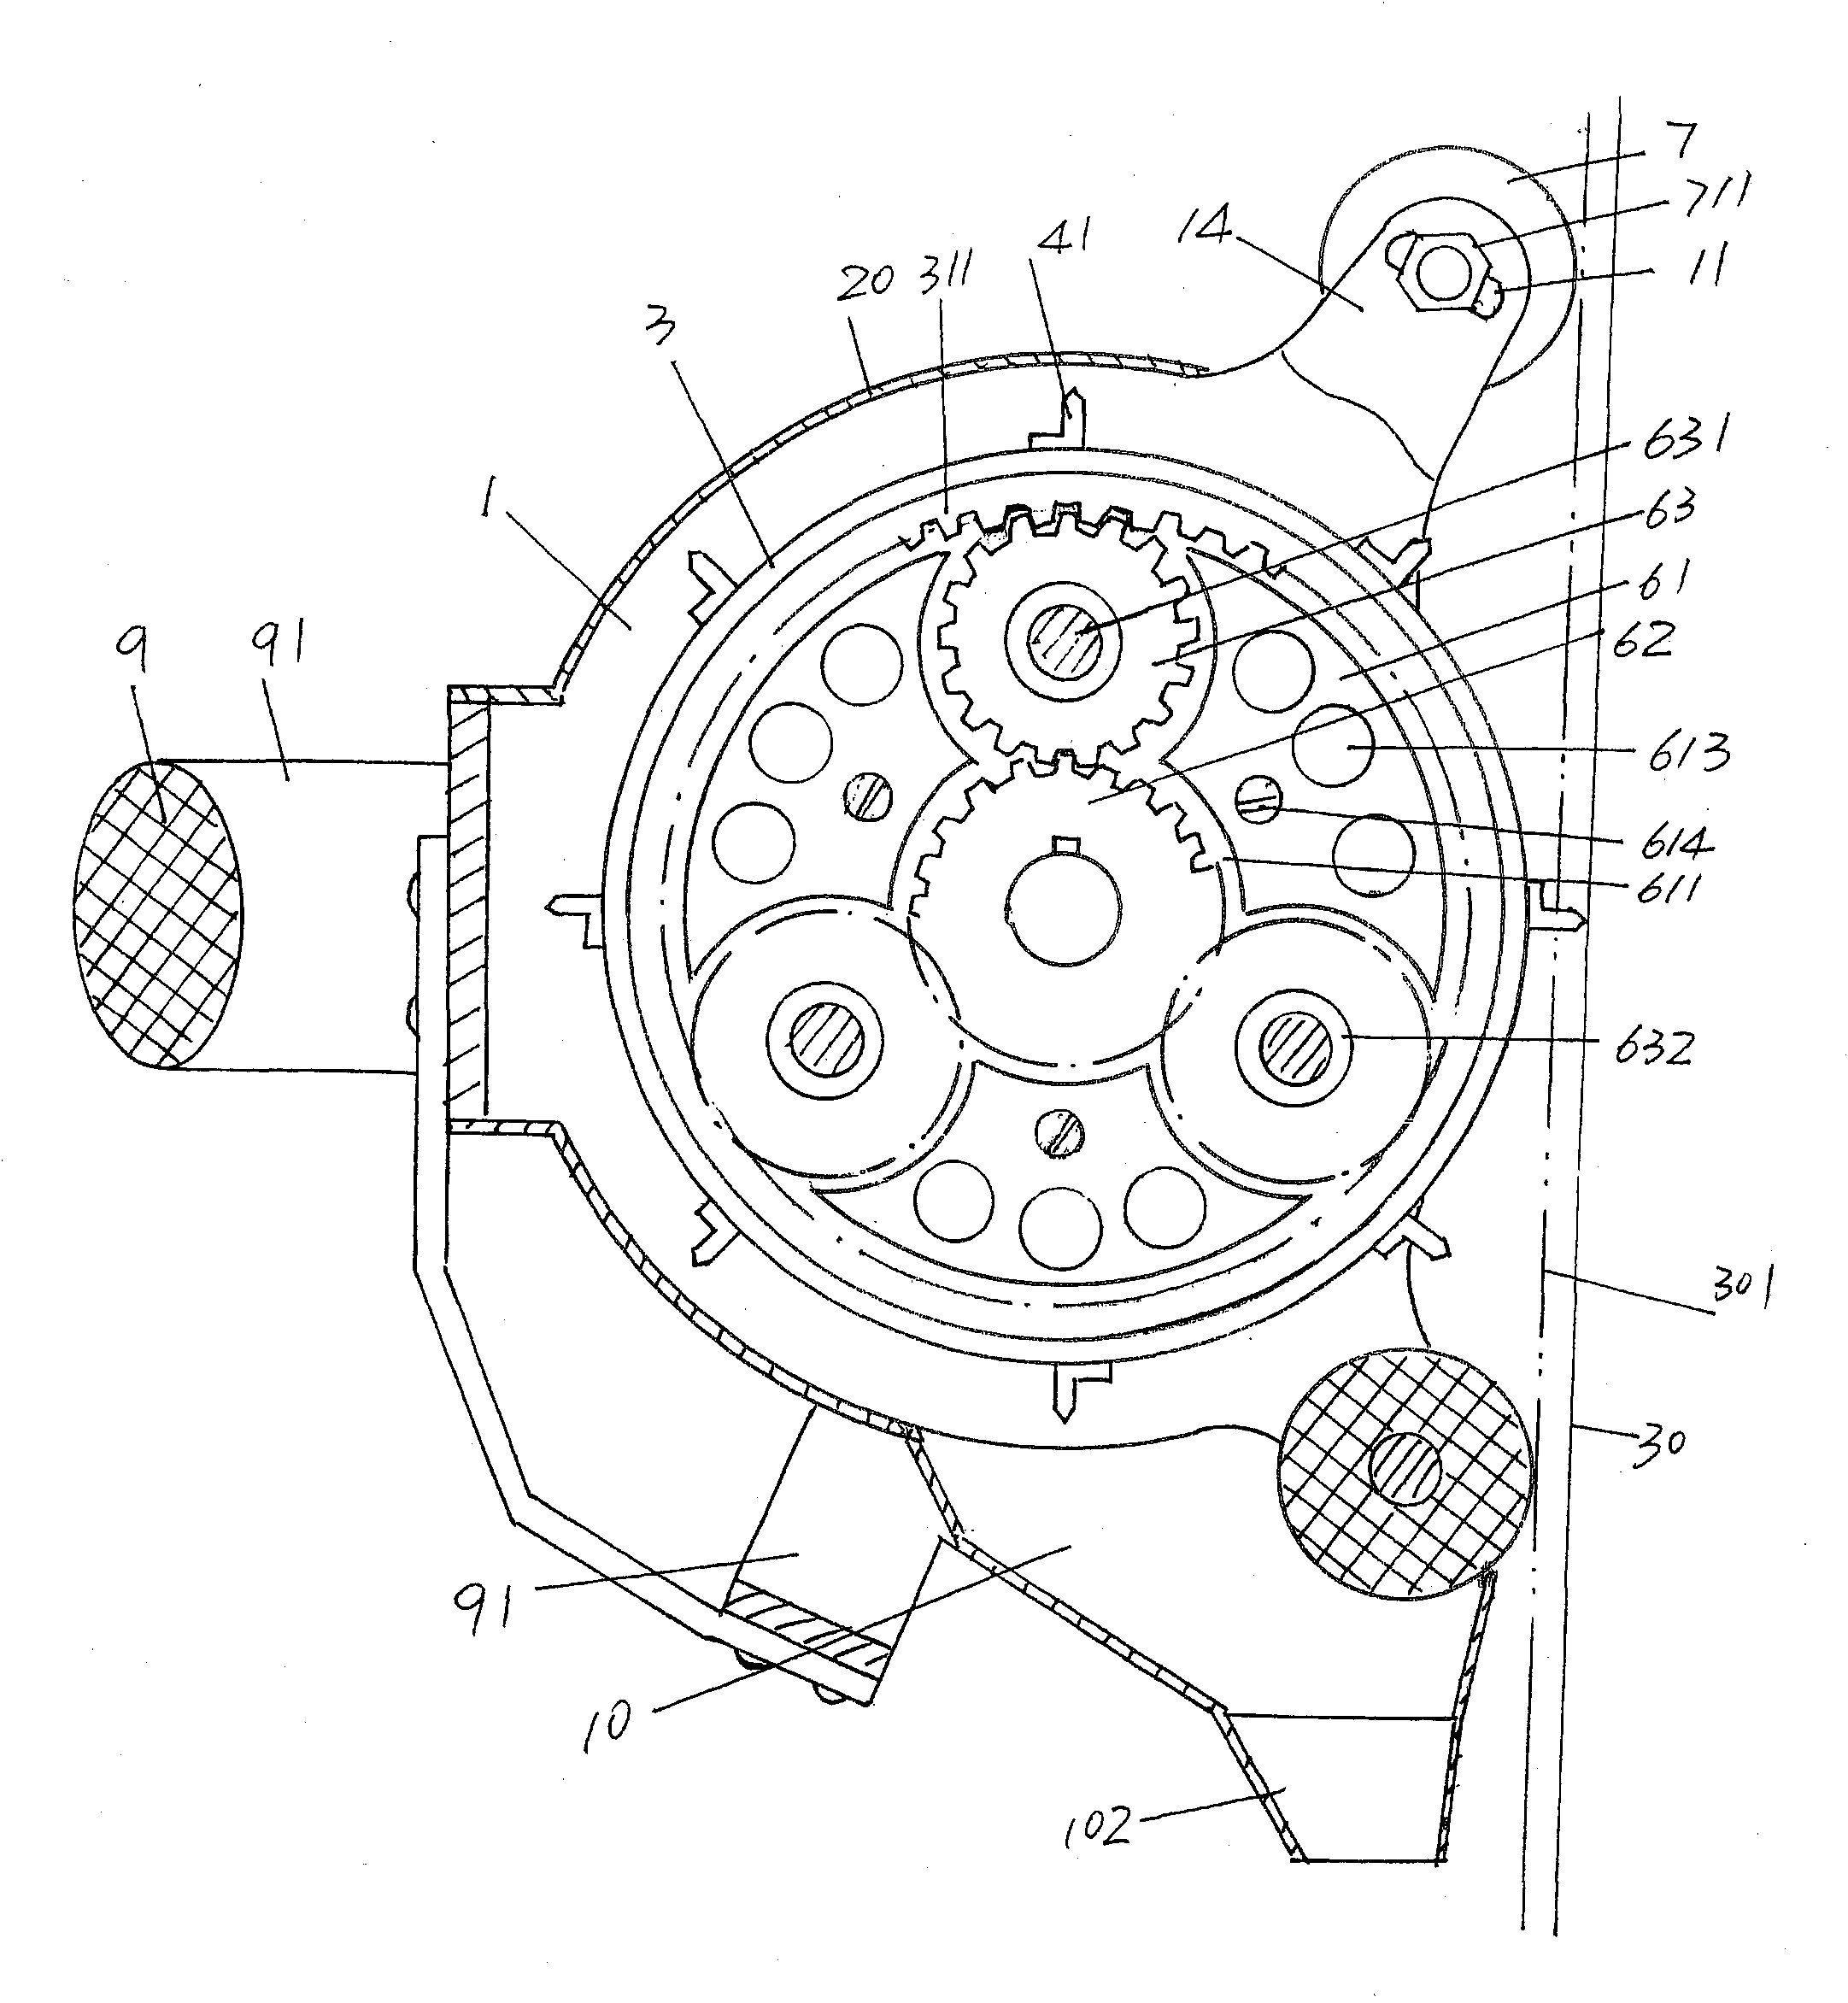 Device for eliminating wall surface coating